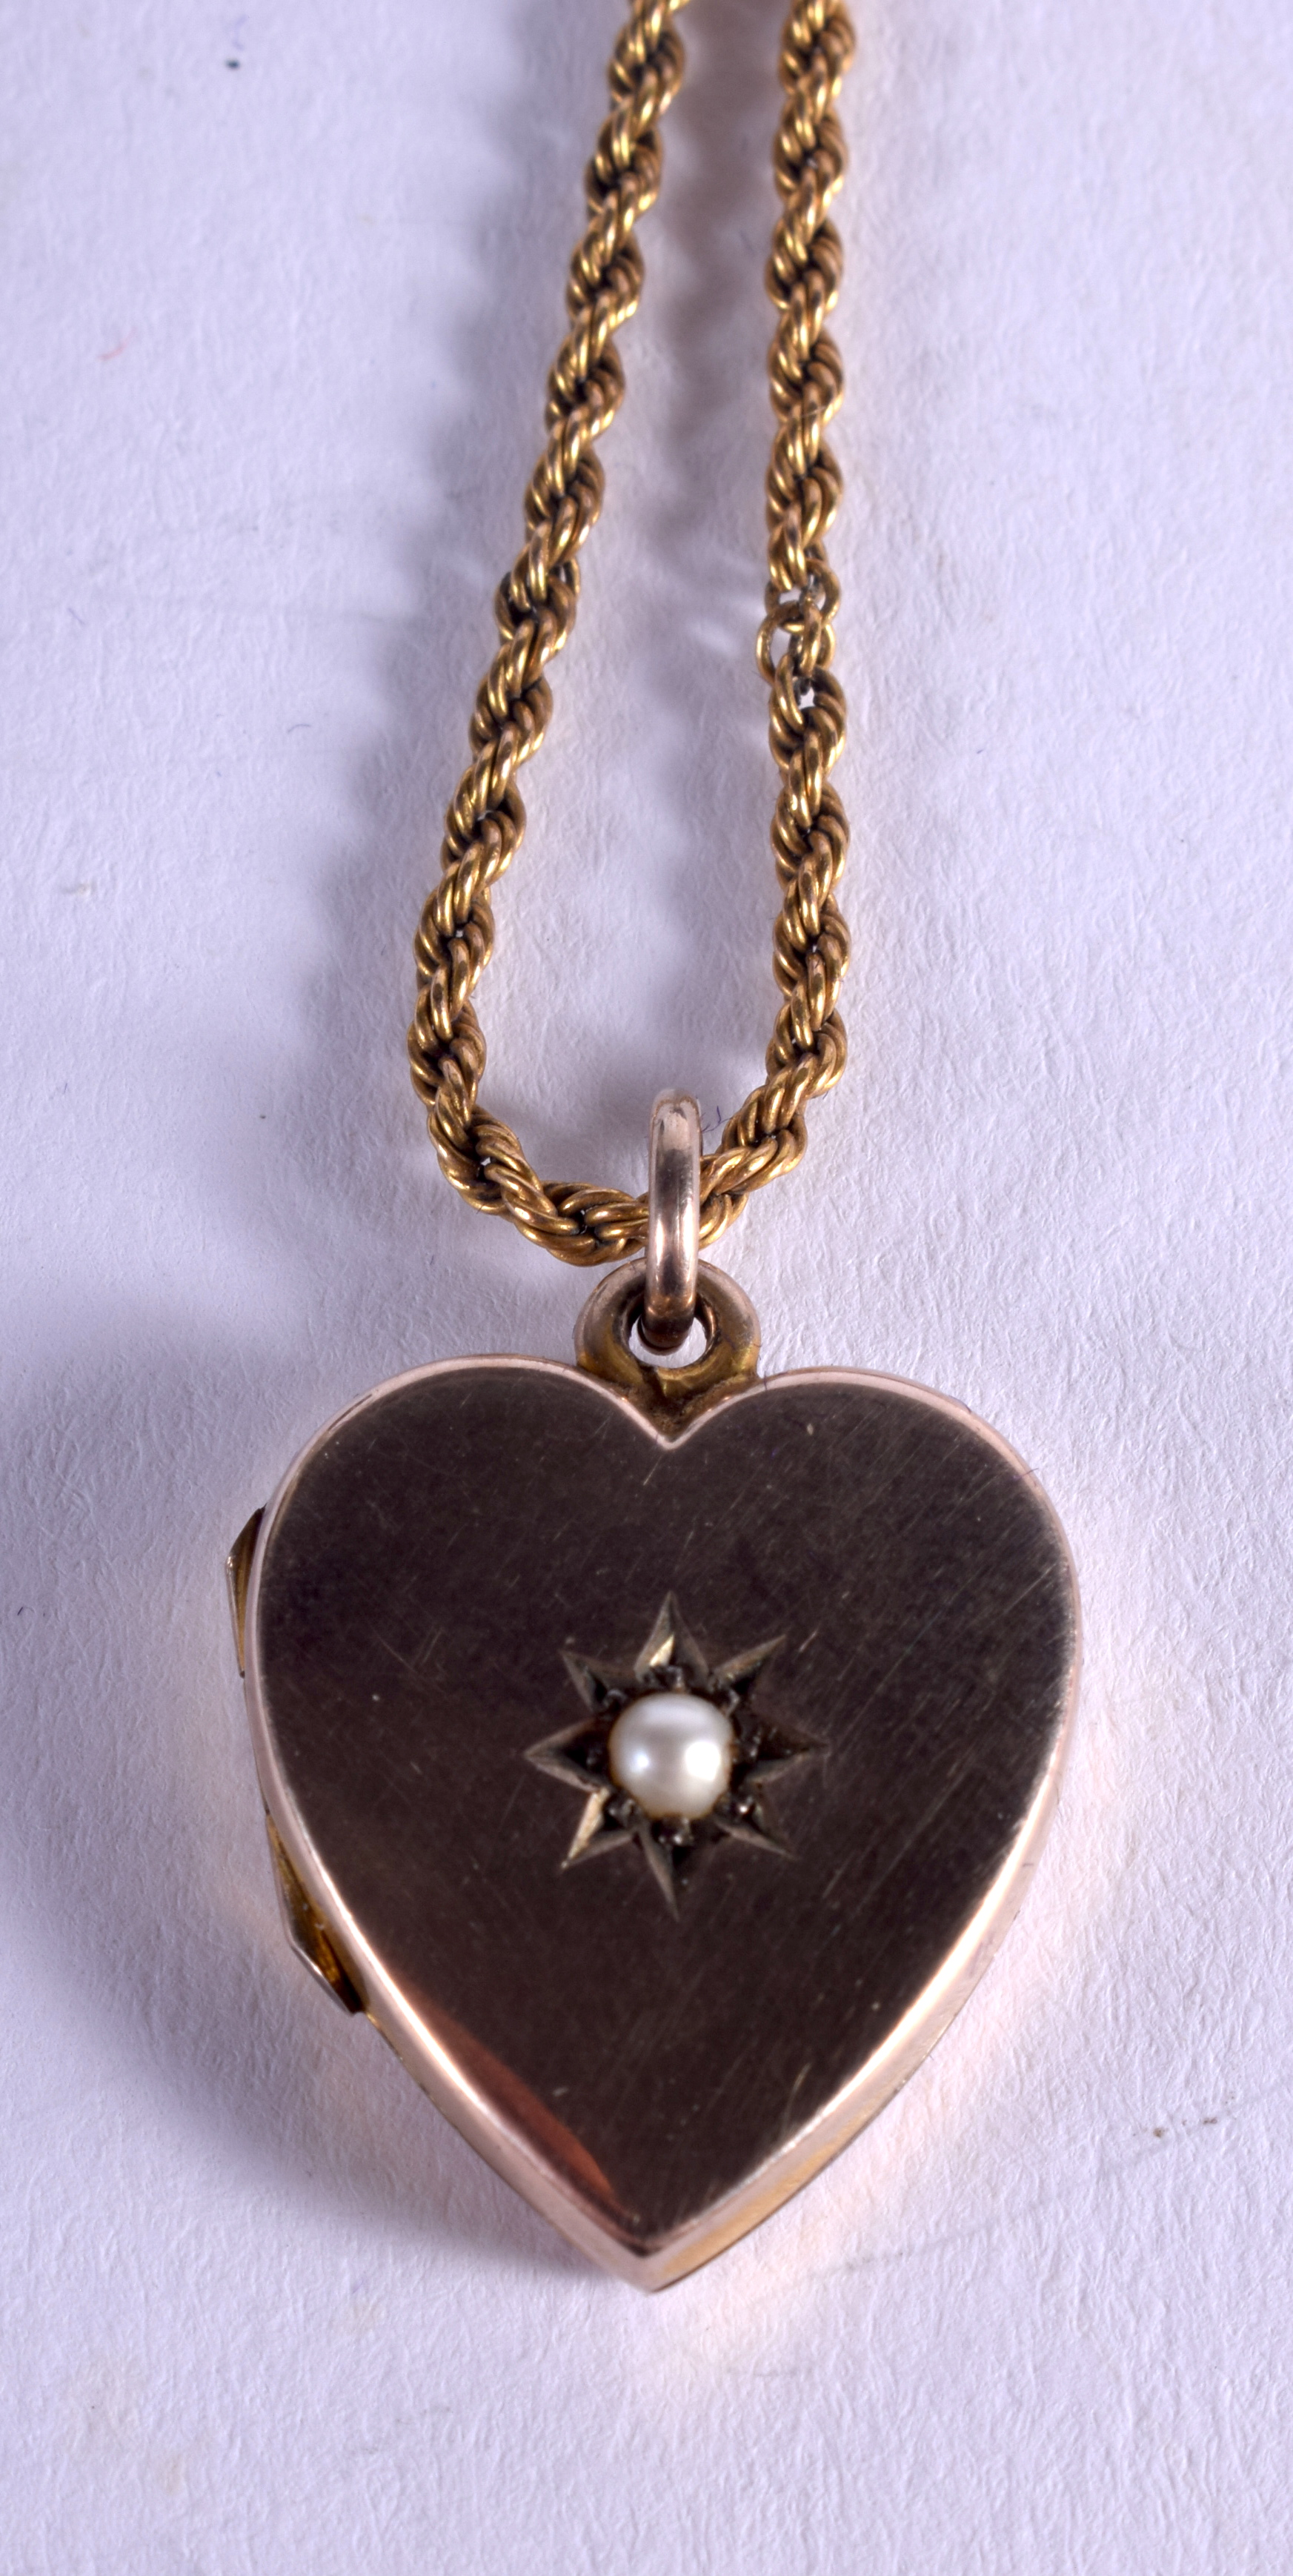 AN EDWARDIAN 9CT GOLD HEART PENDANT on chain. 7.5 grams. - Image 2 of 4